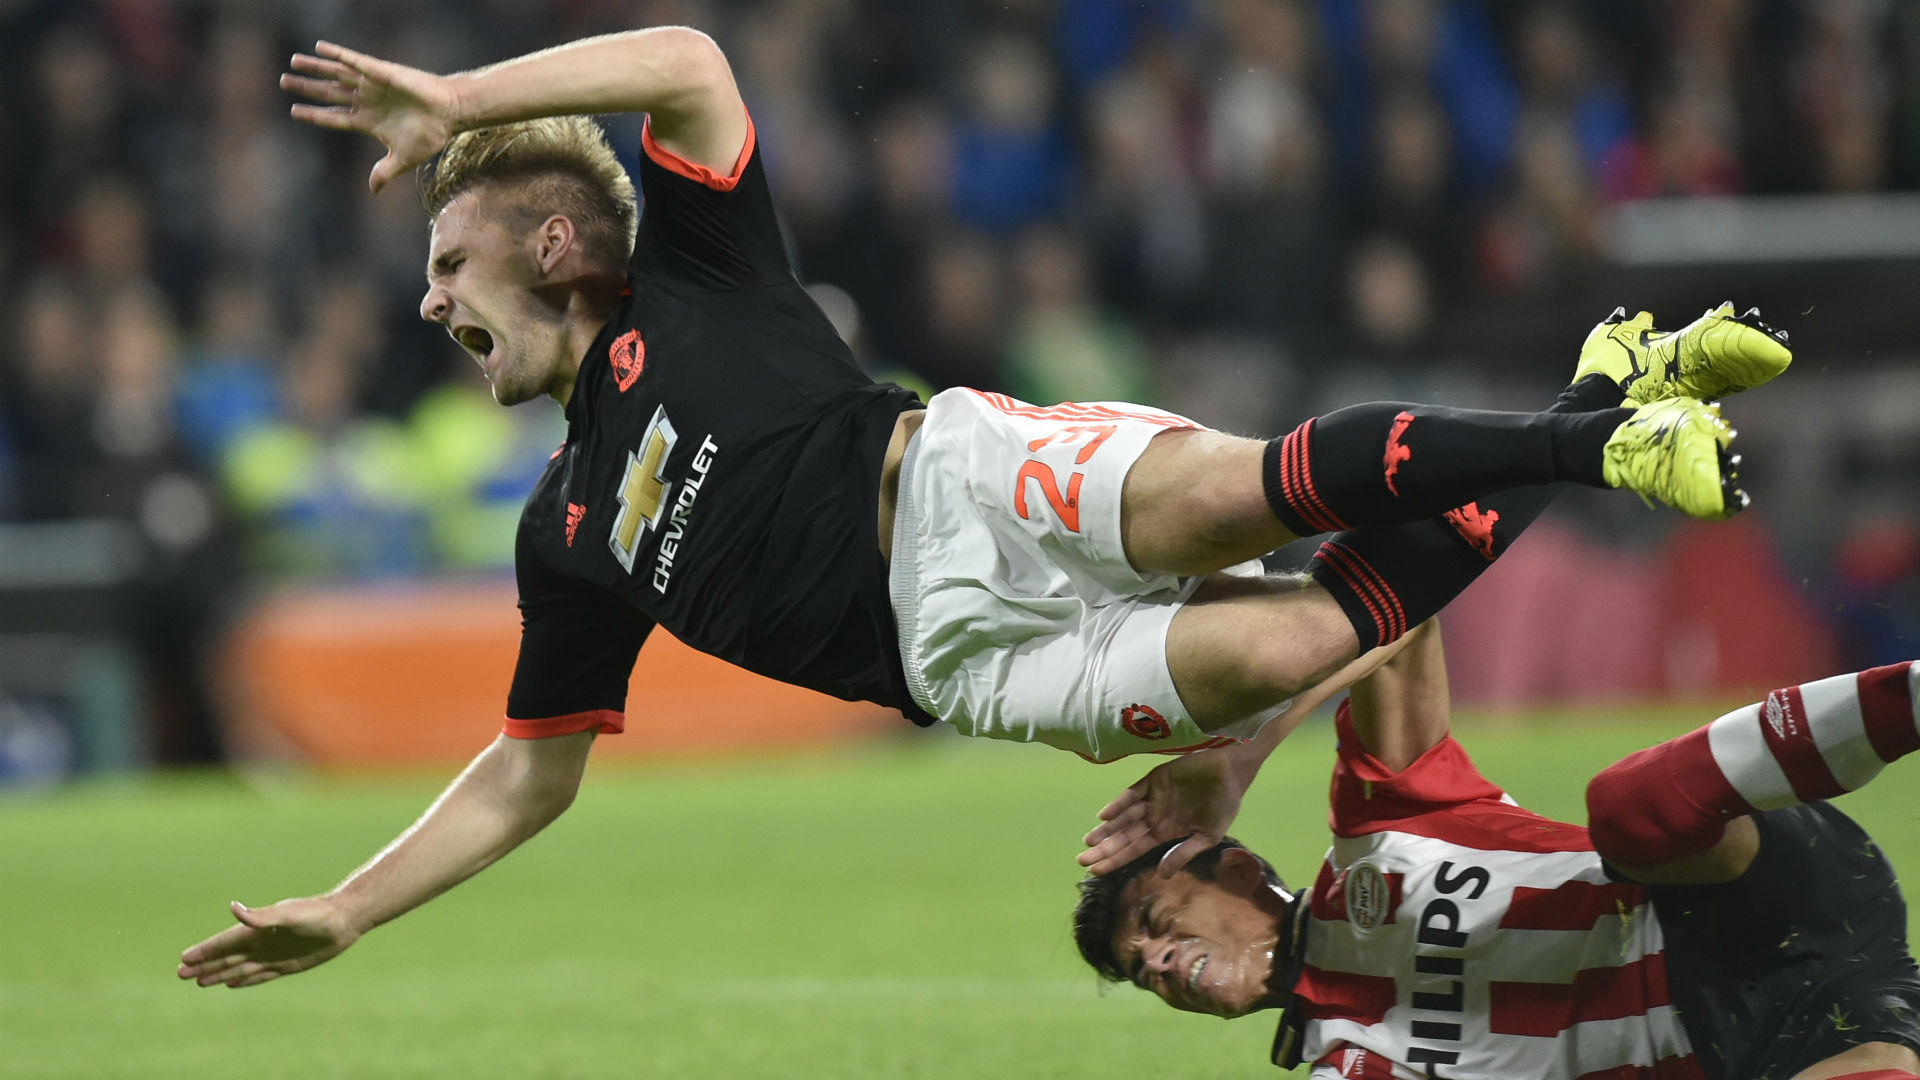  Luke Shaw is injured and in pain after a tackle during a soccer match.